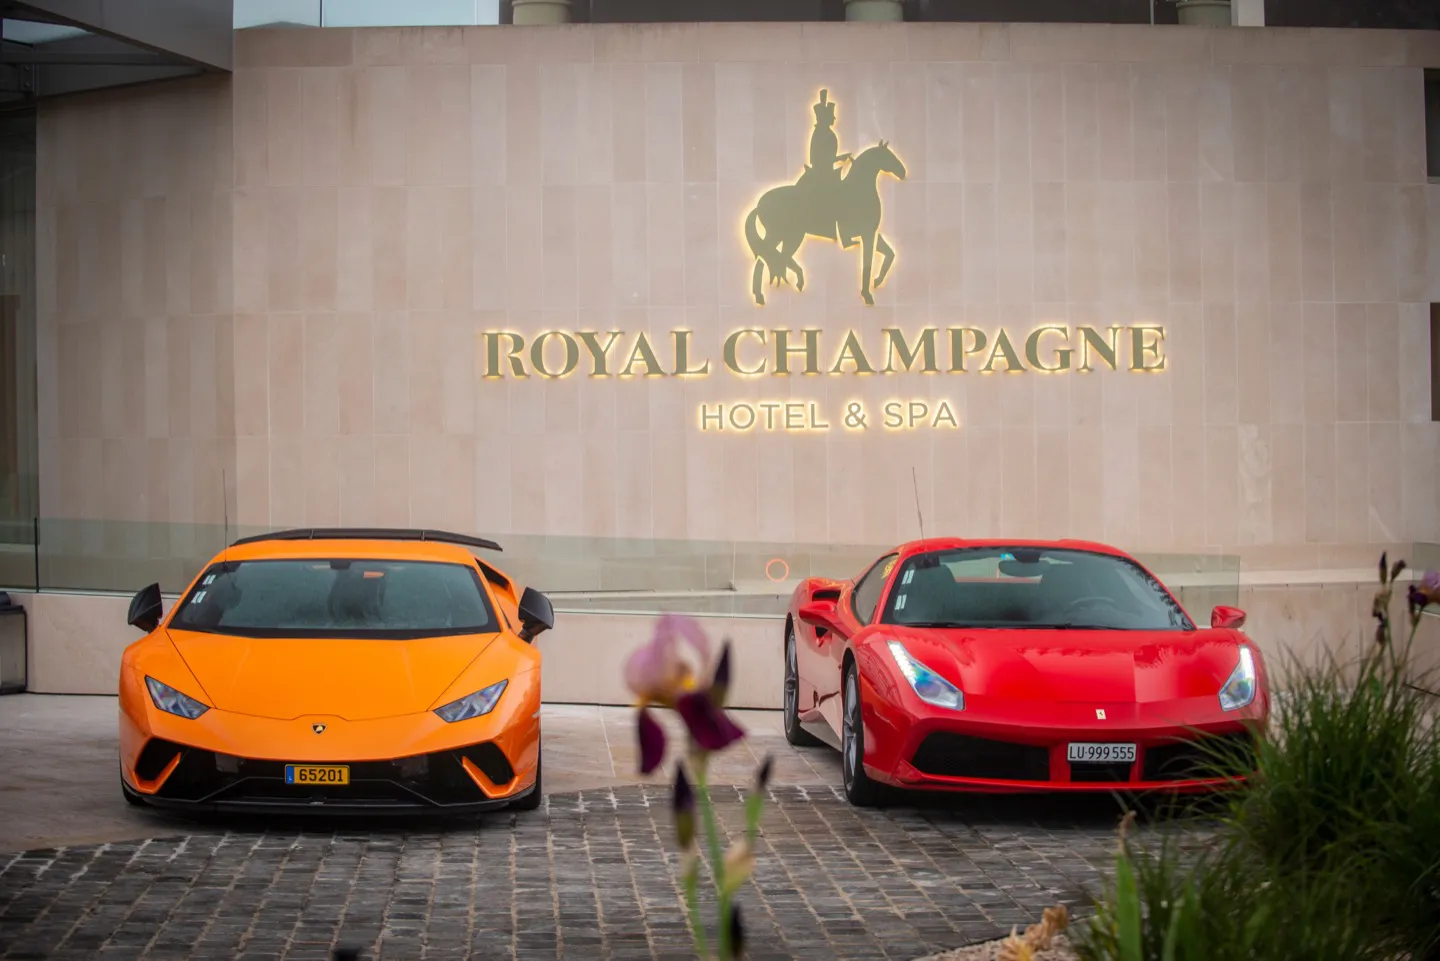 Drive a Lamborghini or Ferrari on a luxury holiday package in Champagne, France